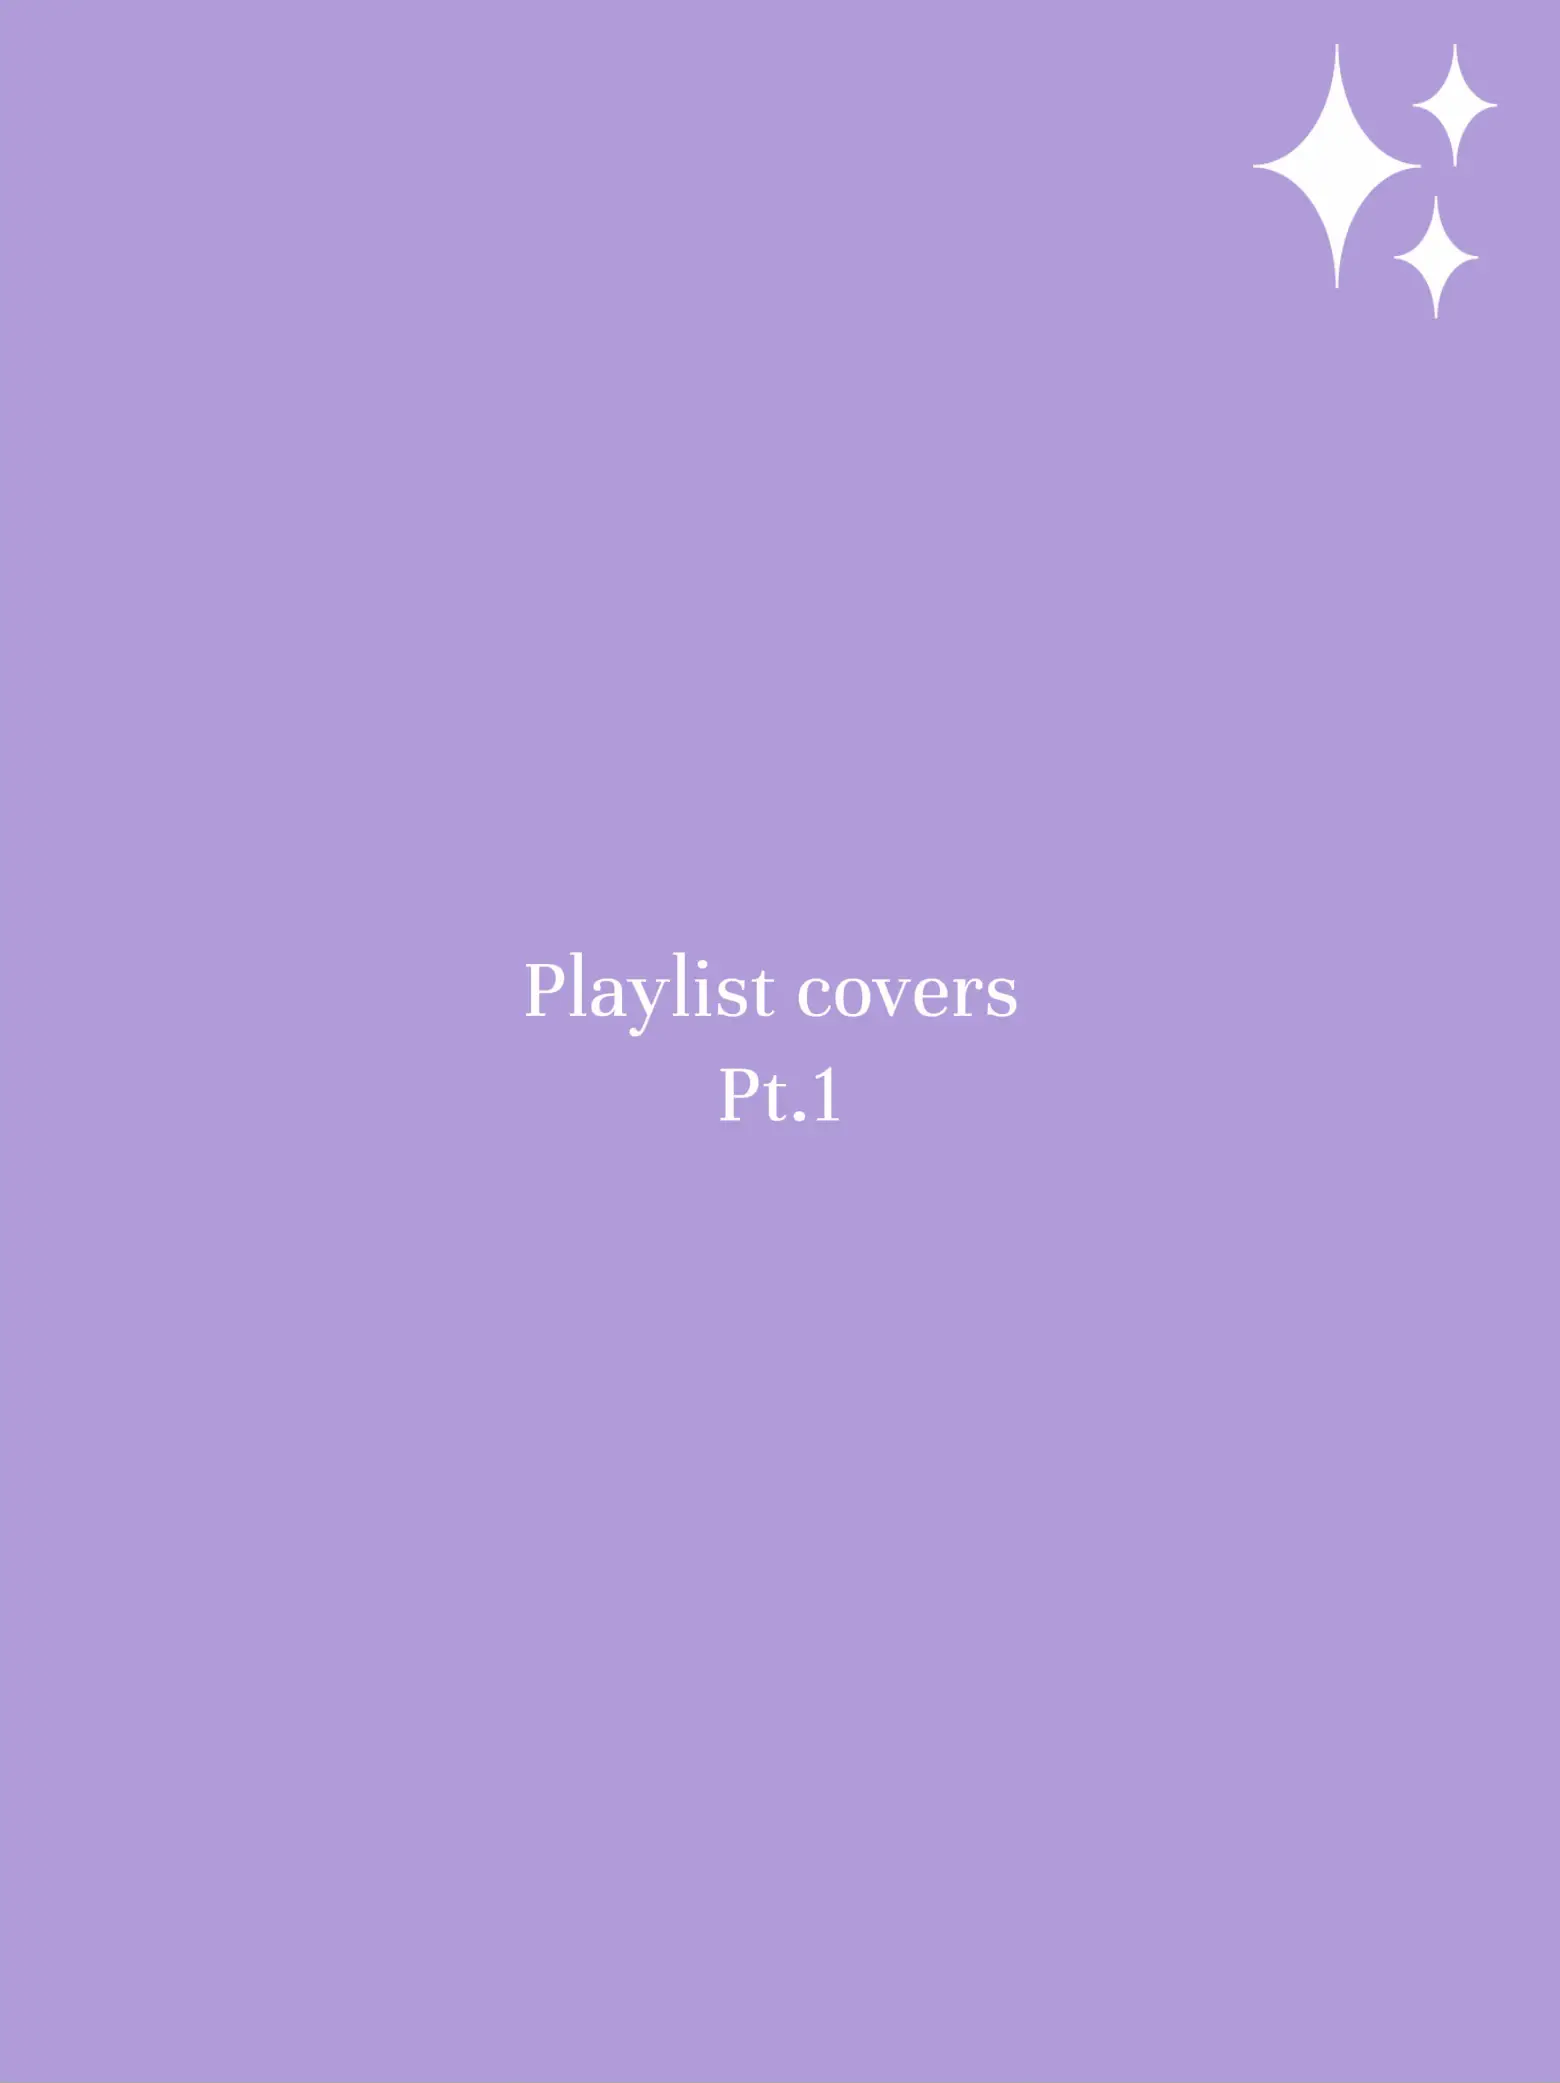  A playlist cover with a star on it.